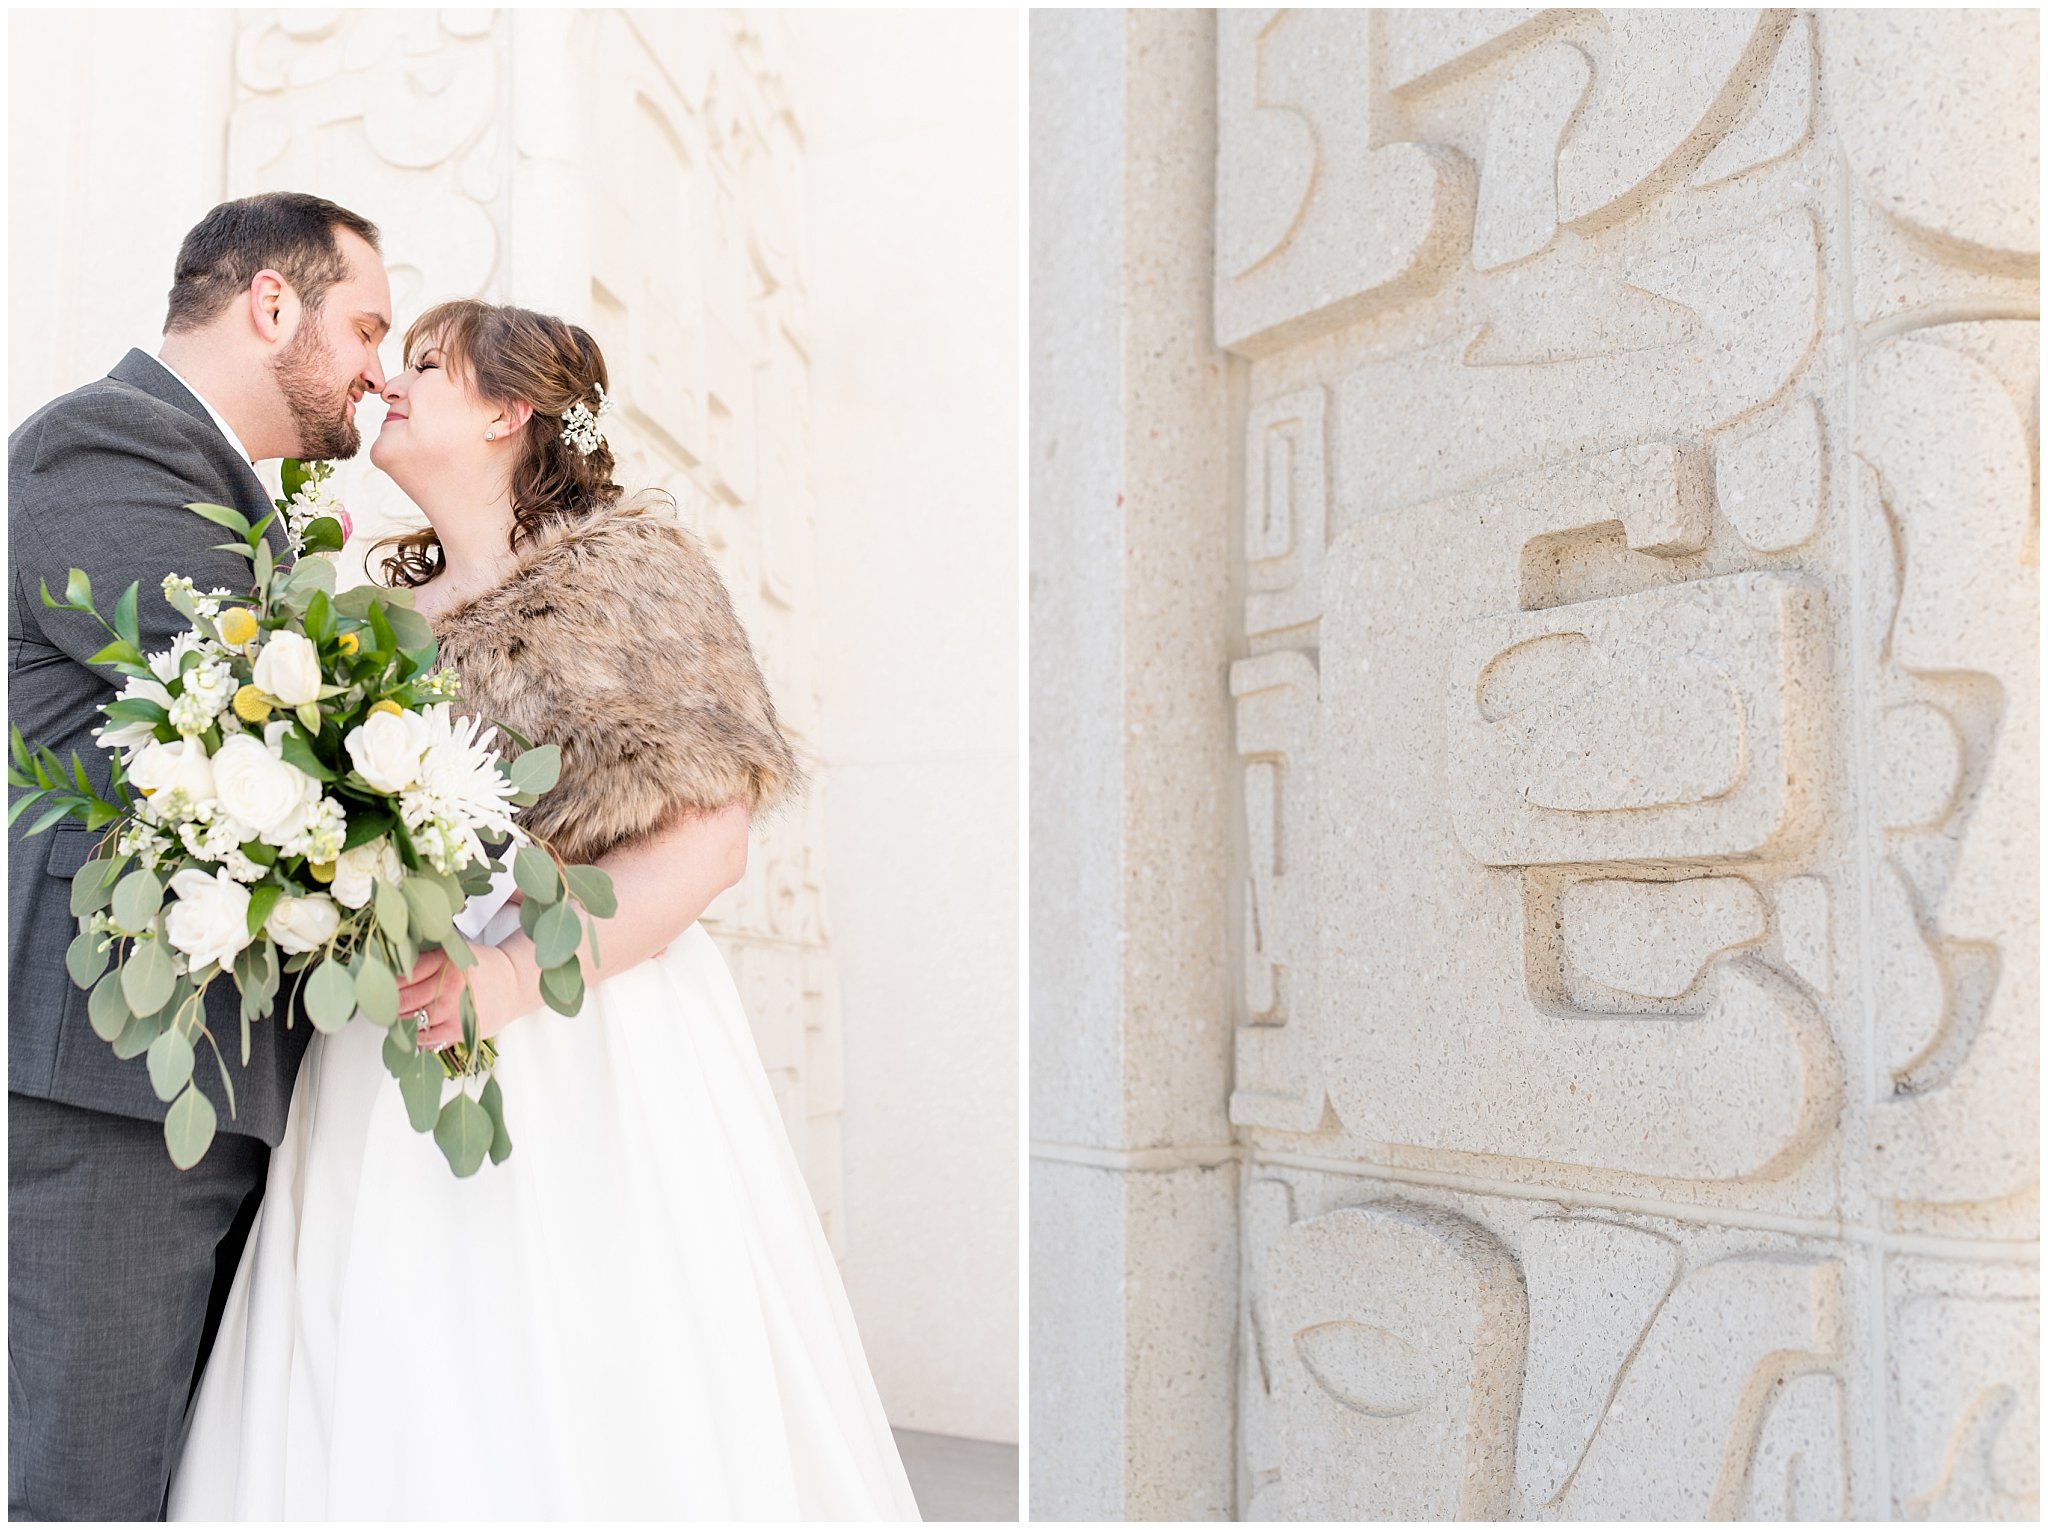 Bride and groom portraits | Ogden Temple Wedding | Jessie and Dallin Photography